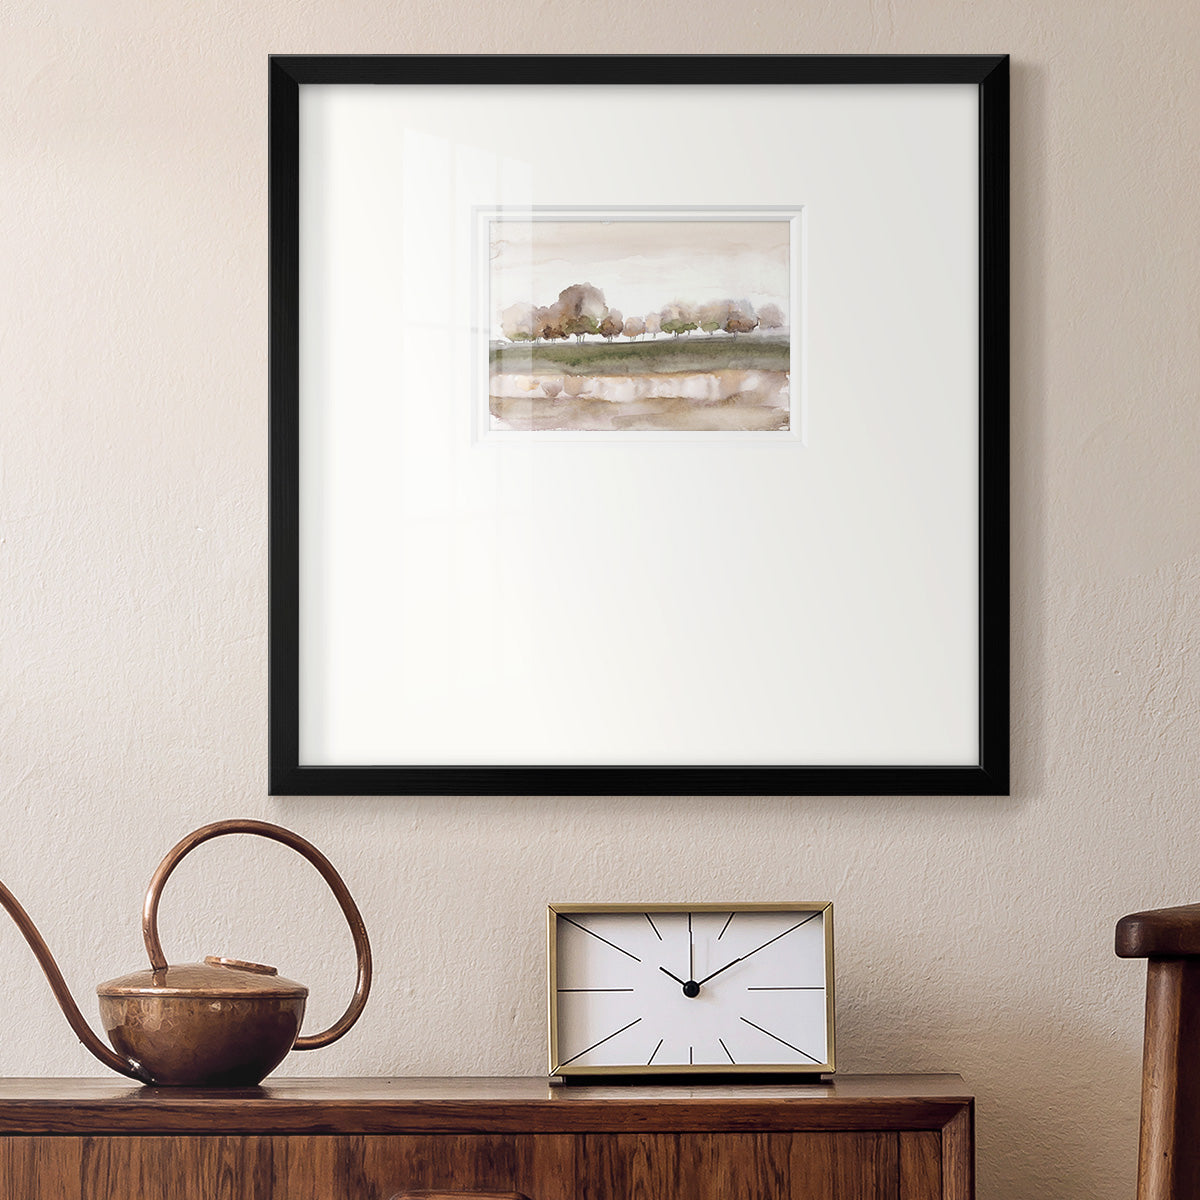 Soft Welcome Spring Premium Framed Print Double Matboard